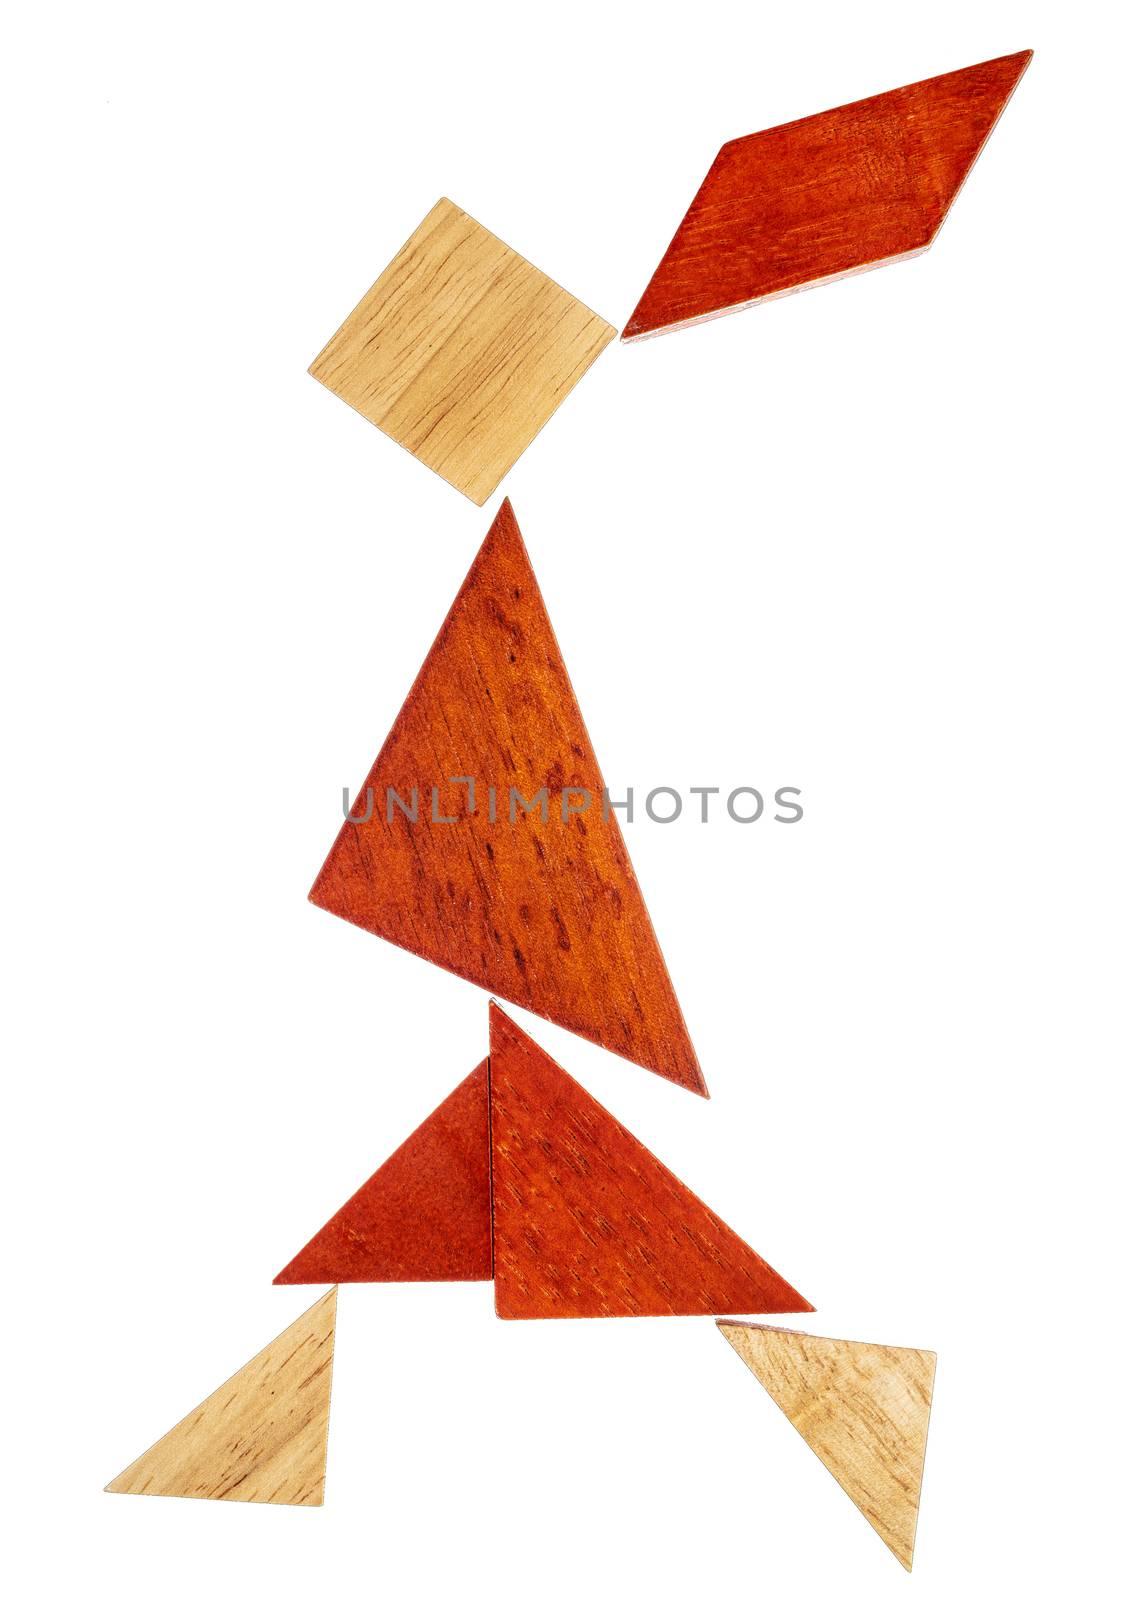 abstract figure of a walking or running girl built from seven tangram wooden pieces, a traditional Chinese puzzle game, isolated on white